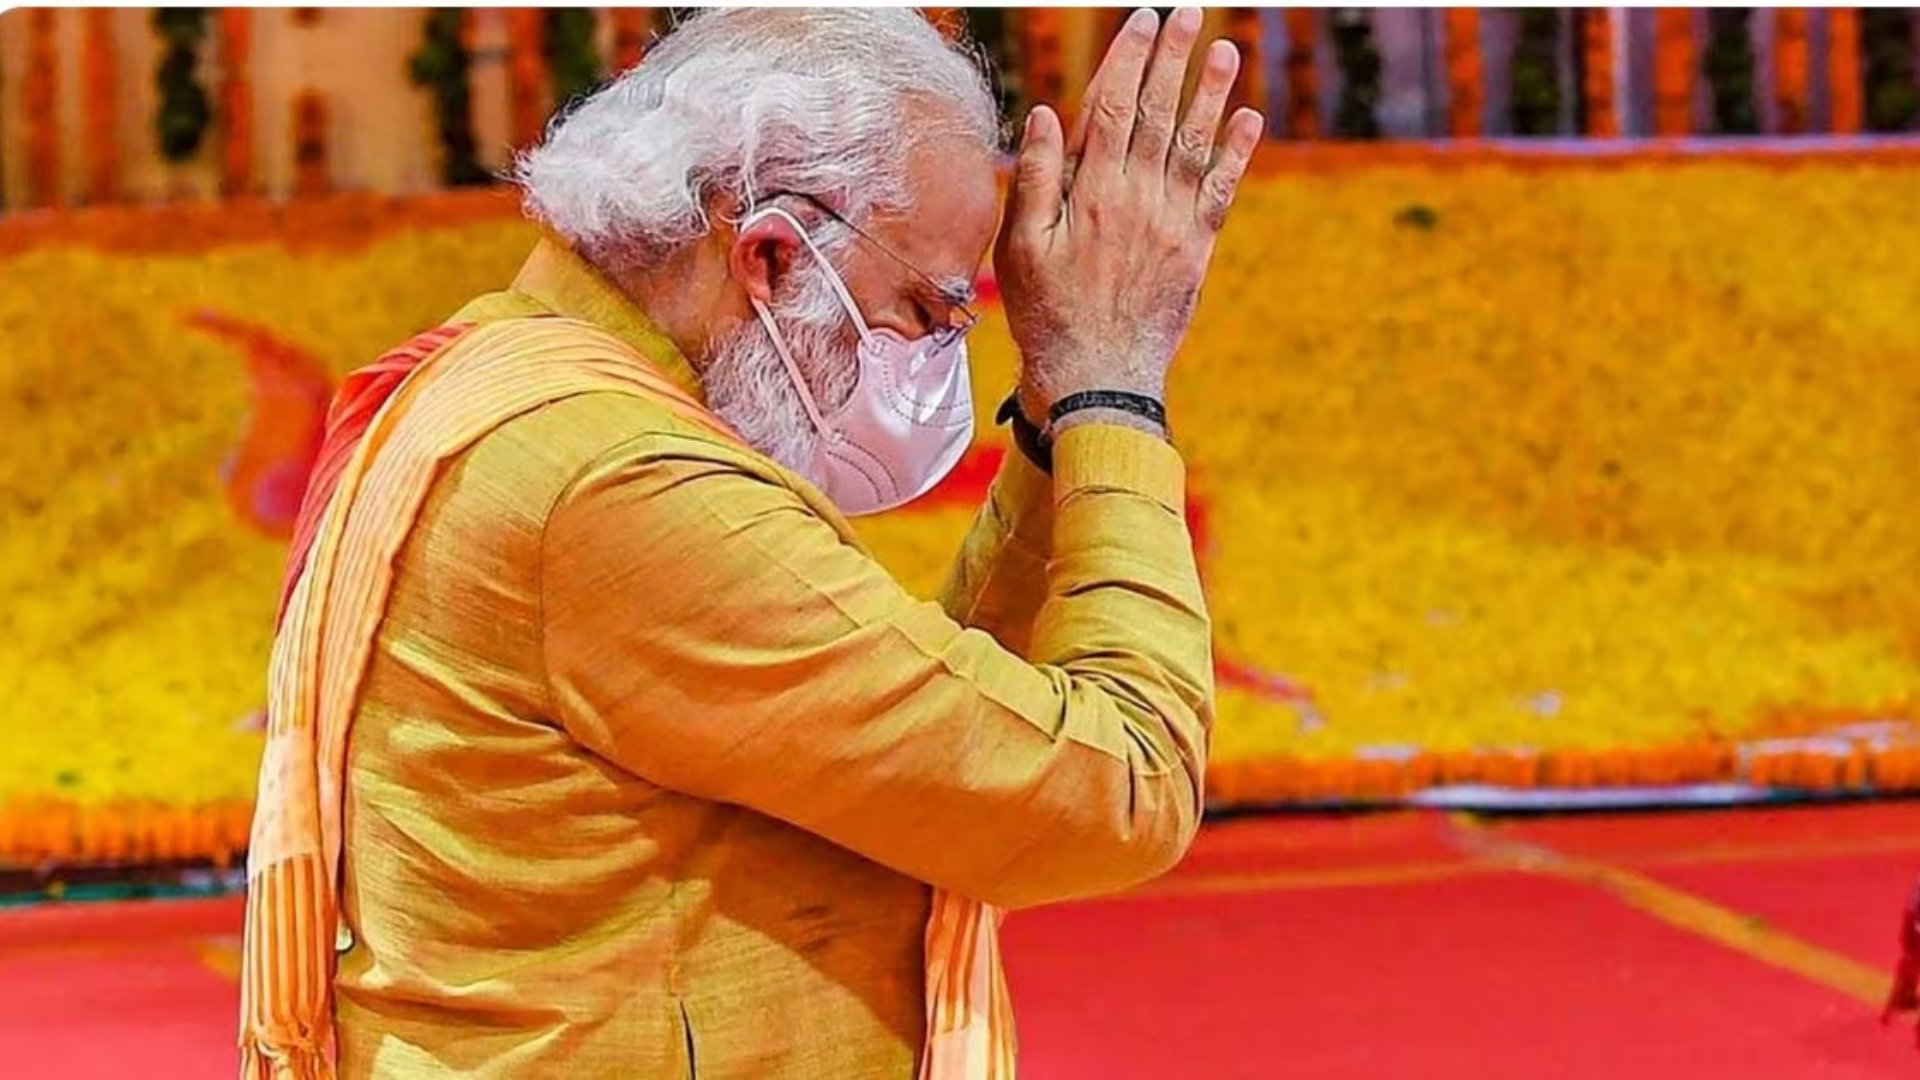 PM Modi to begin 11 Day ‘Anushthan’ Ahead of Ram Temple Consecration